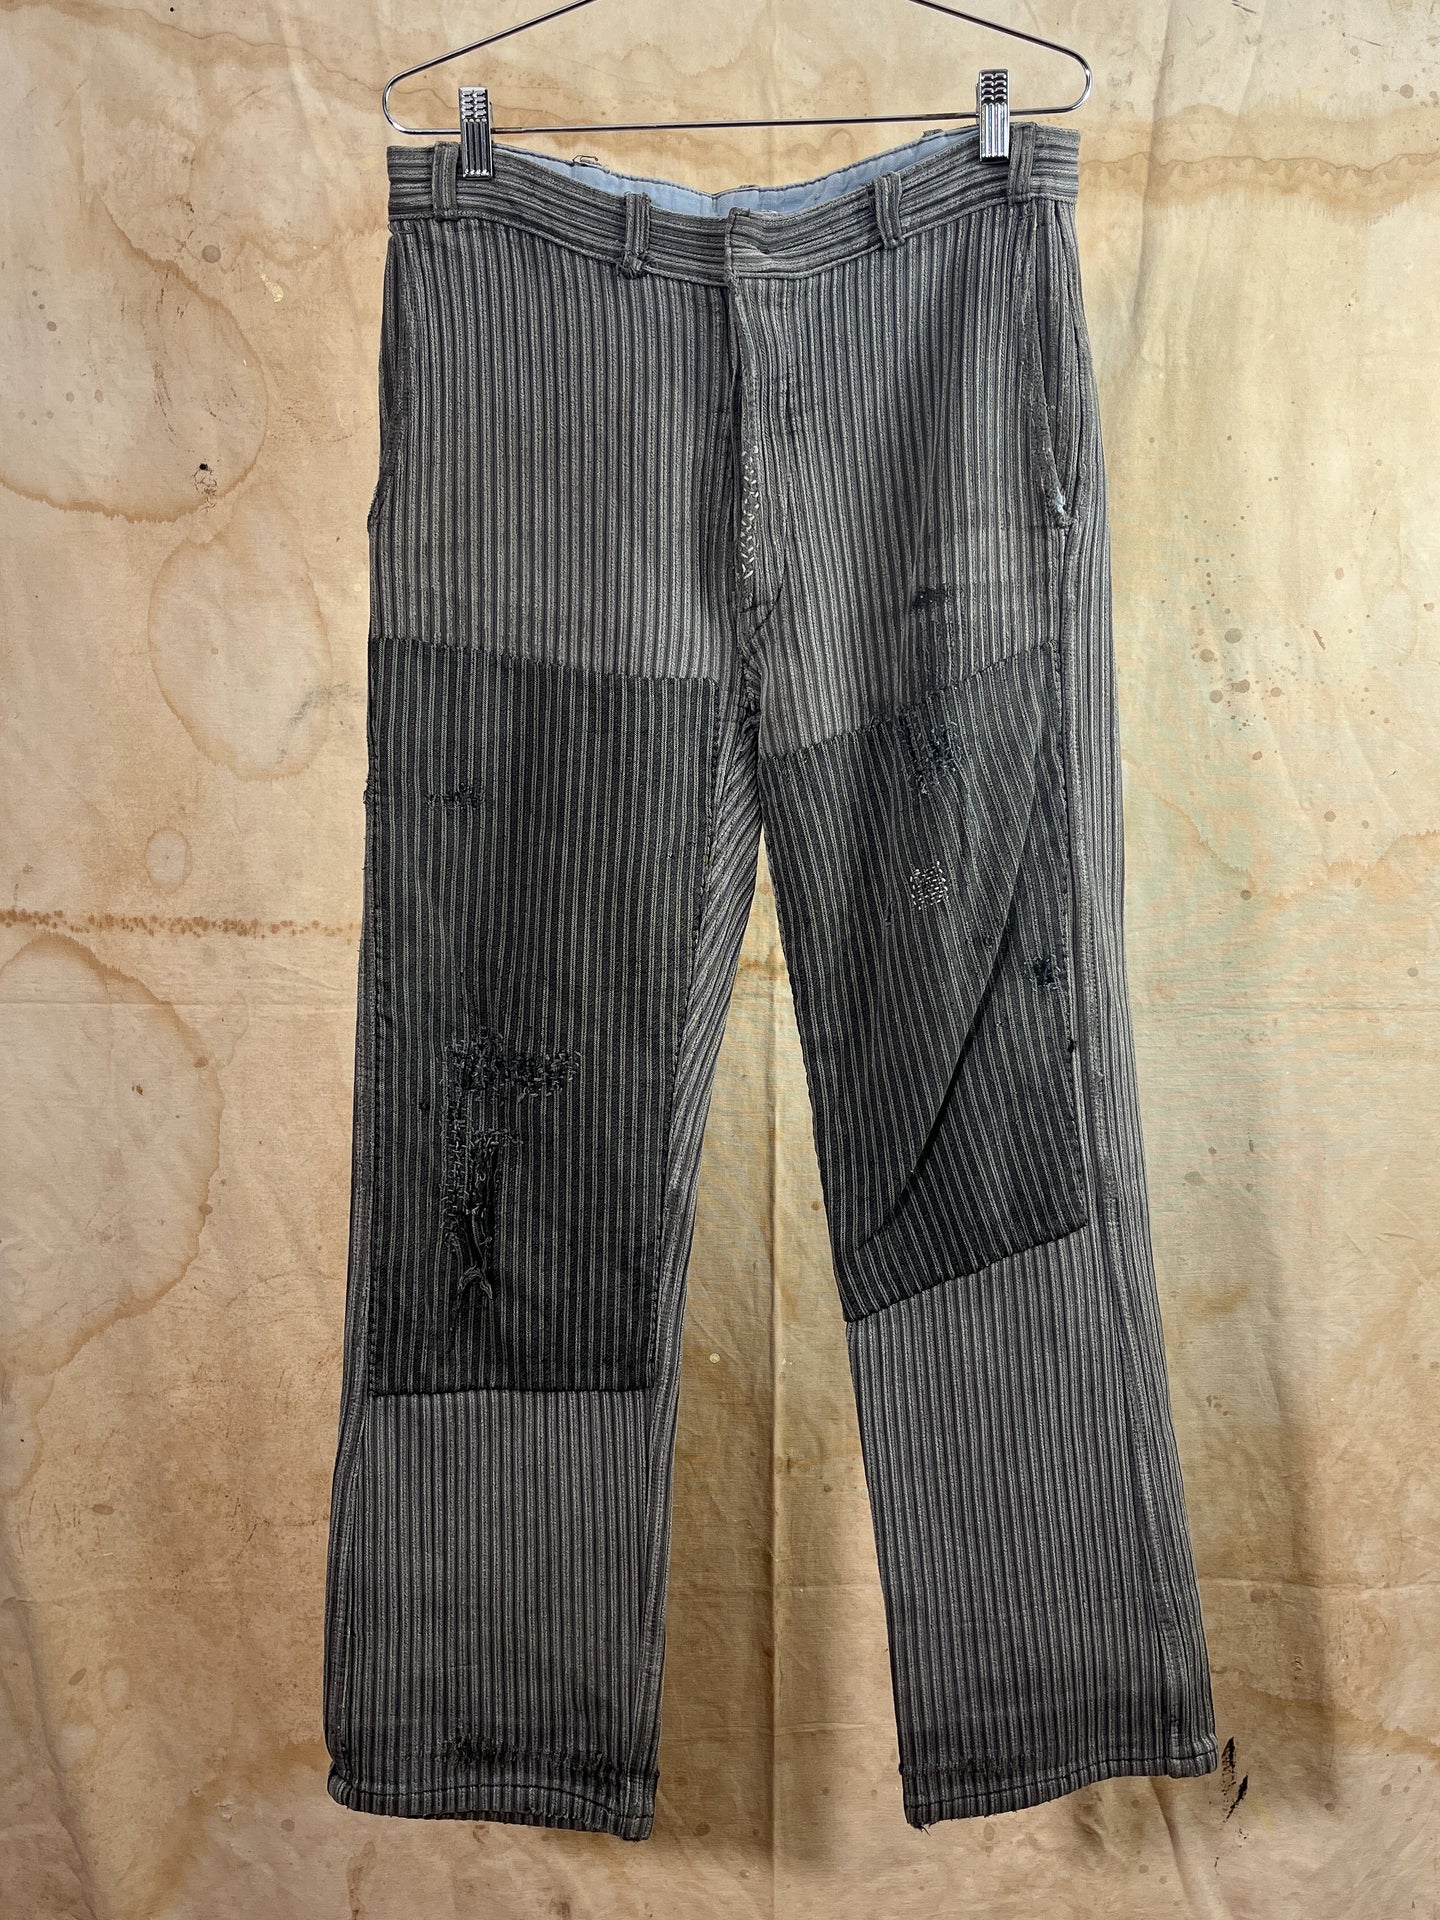 Patched & Mended Gray French Workwear Trousers c.1950s- 60s